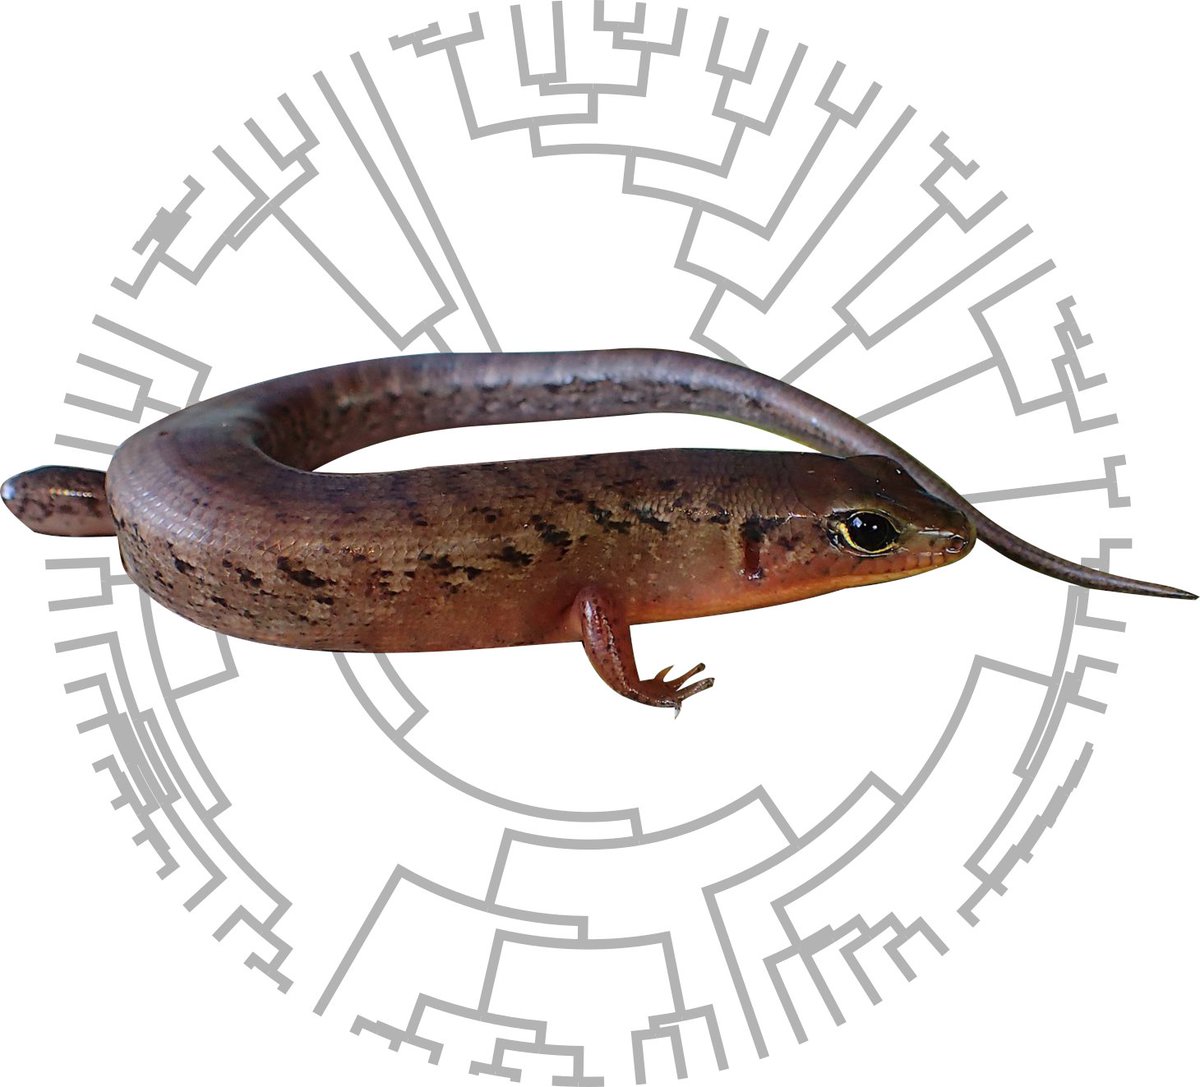 📢PhD alert📢 1 week to go to apply for our PhD position to study the evolutionary relationships of skinks. 

The PhD will build a robust phylogeny from freshly collected sphenomorphin tissue samples and museum samples (applying a historical DNA (museomics) approach). 1/2